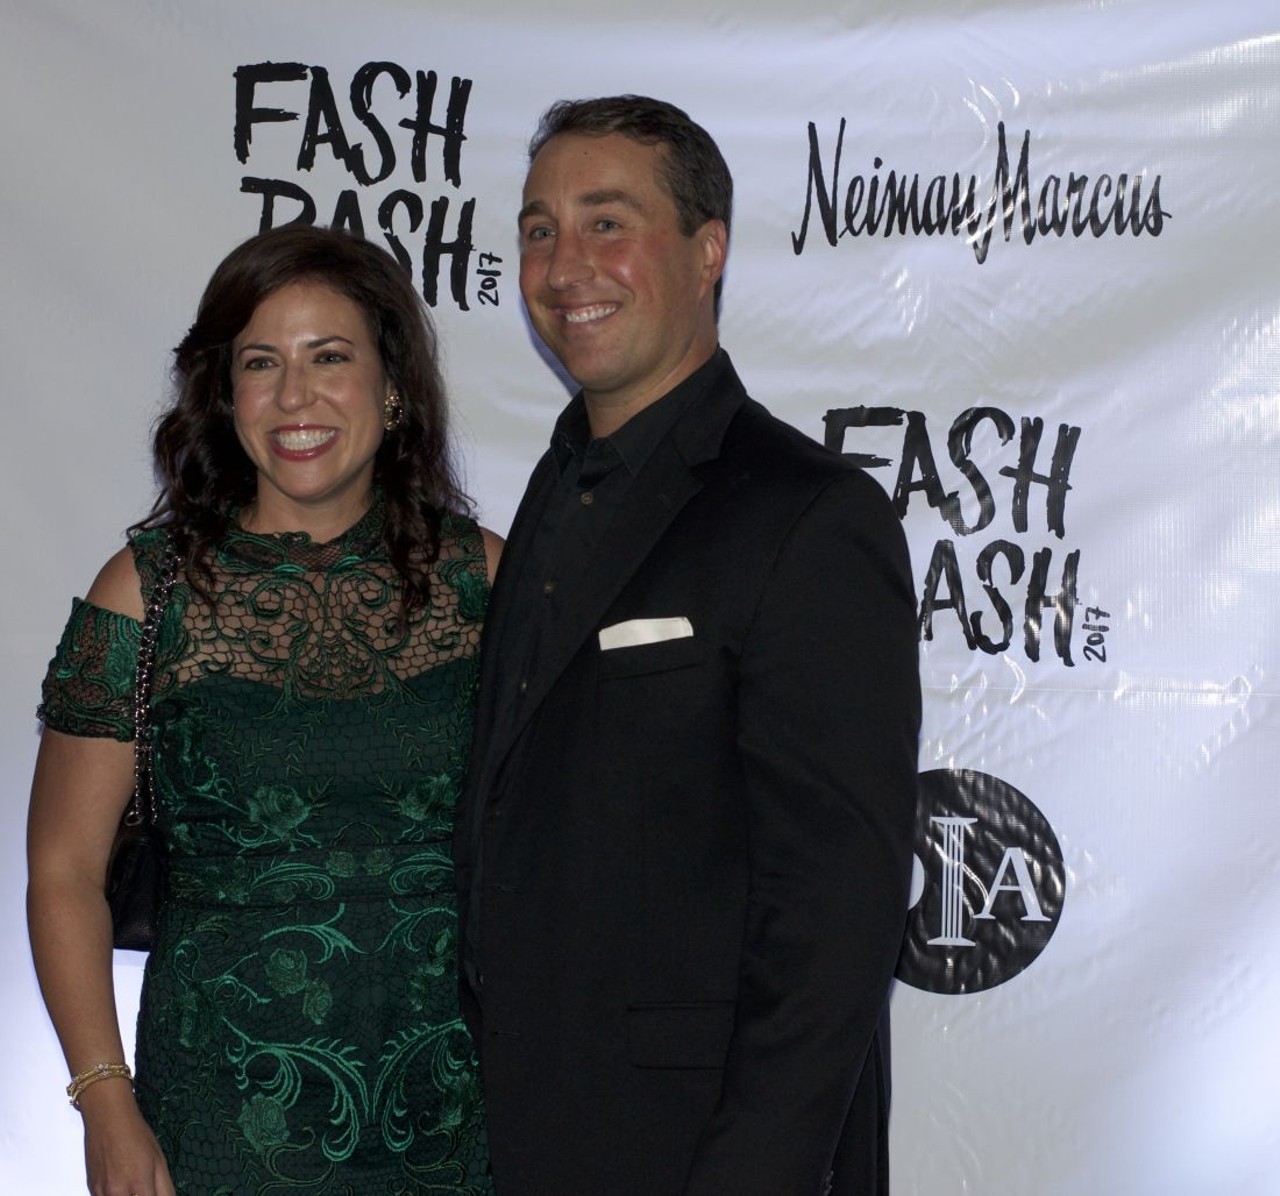 All the fabulous people we saw during Fash Bash @ the DIA